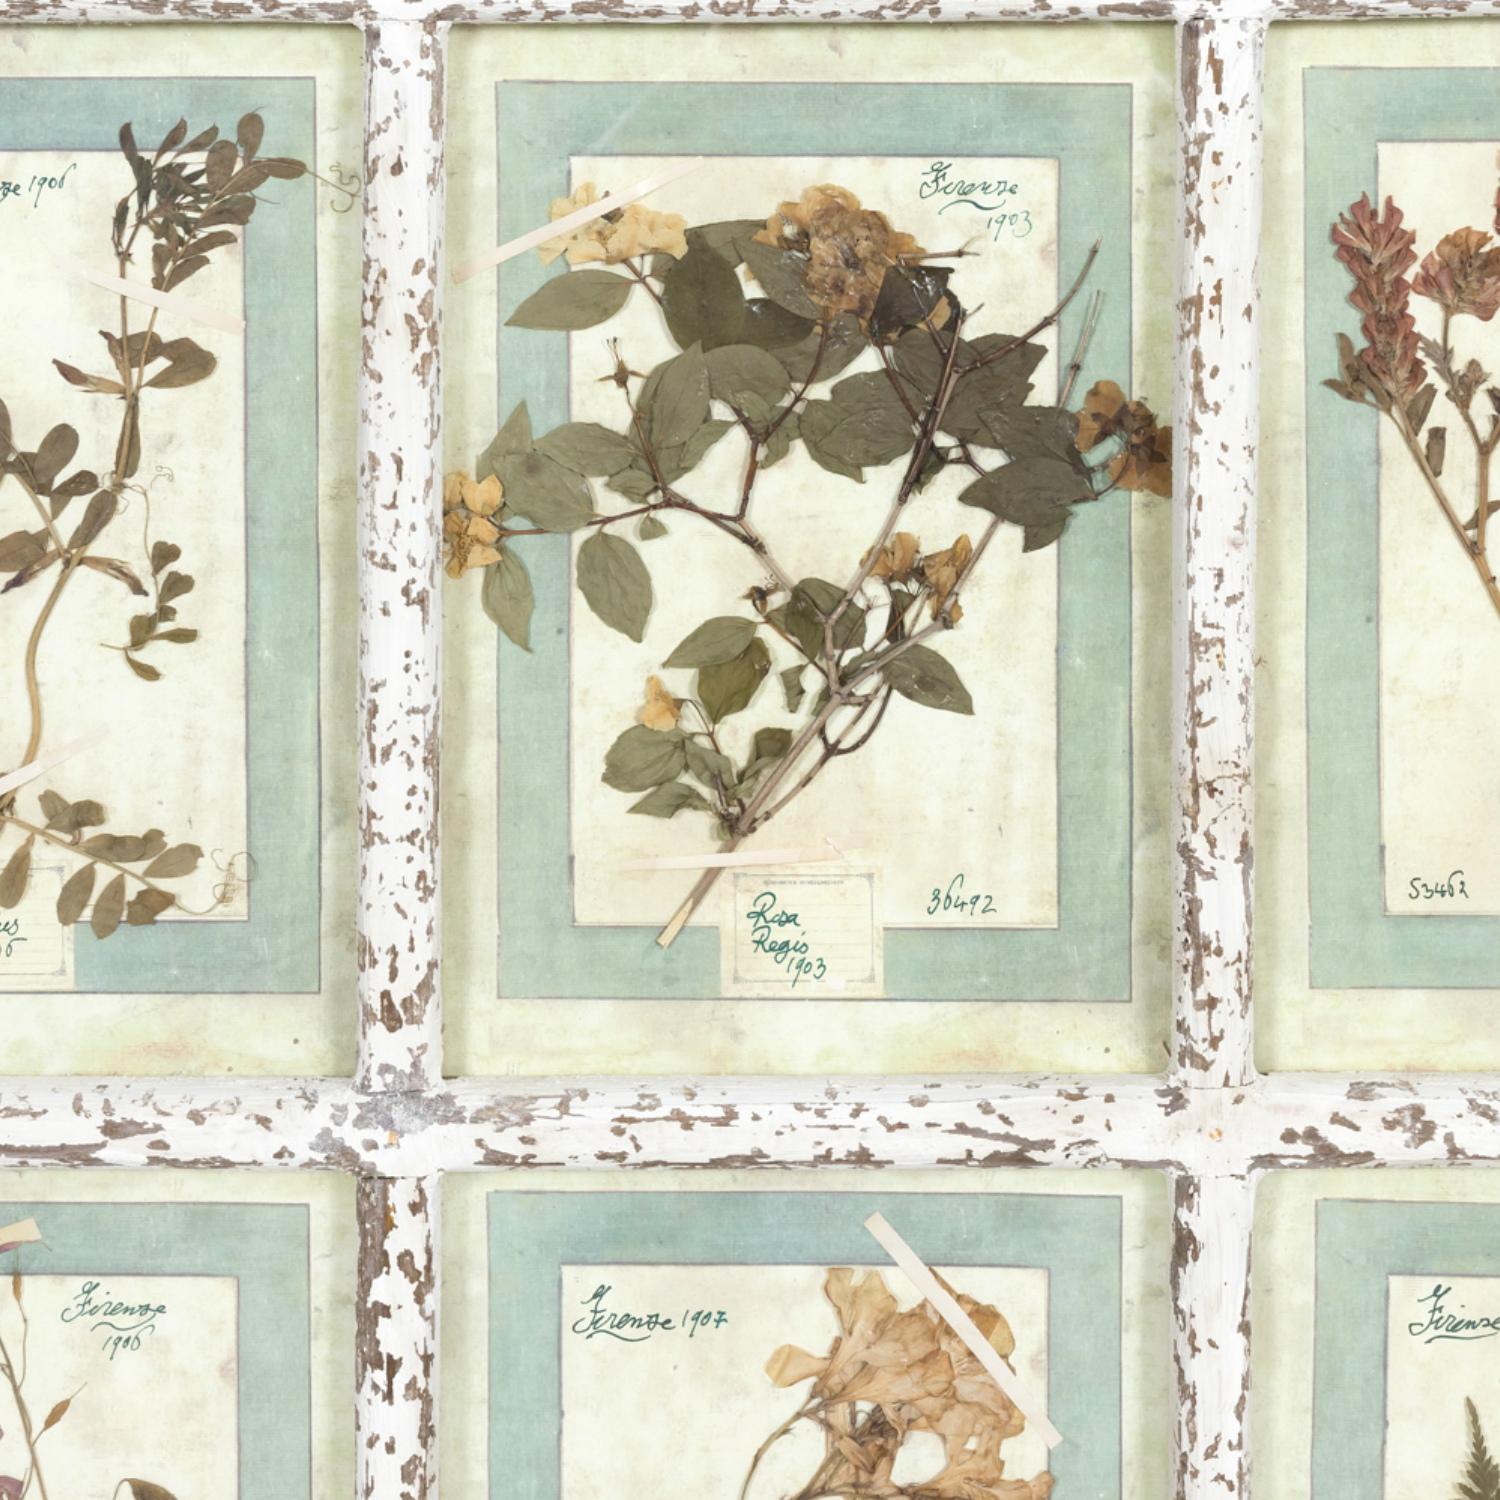 Pressed Collection of 9 Early 20th Century Italian Herbiers in Large Paned Window Frame  For Sale